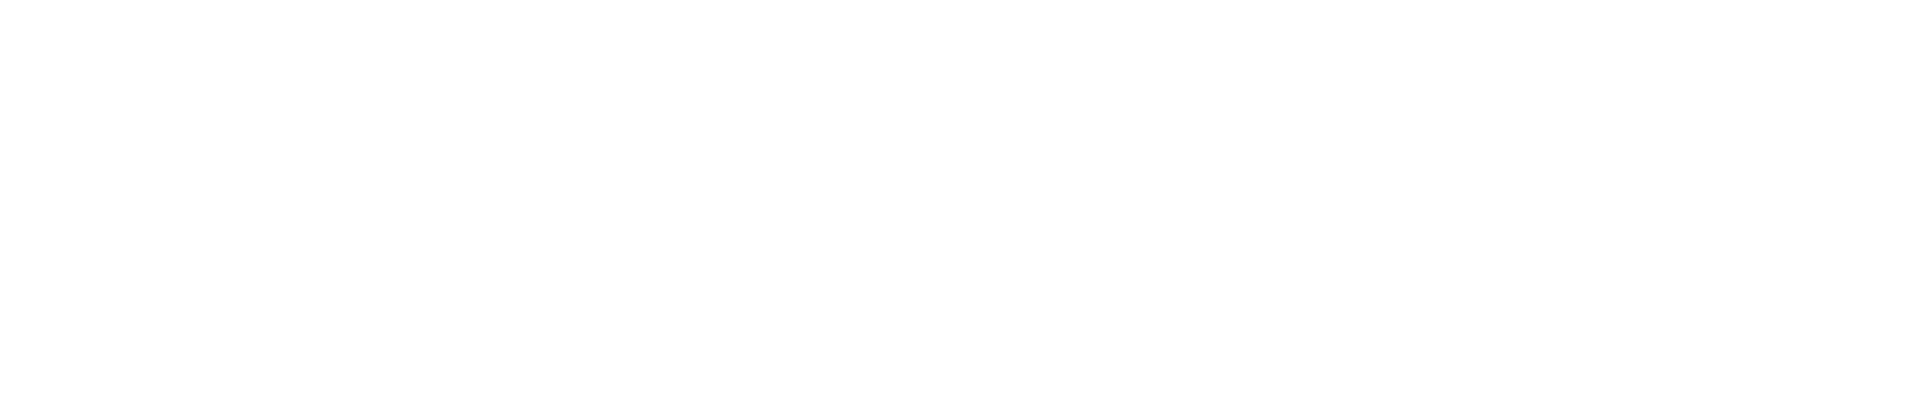 Cornerstone Companies | Helping Clients Achieve Success in Business